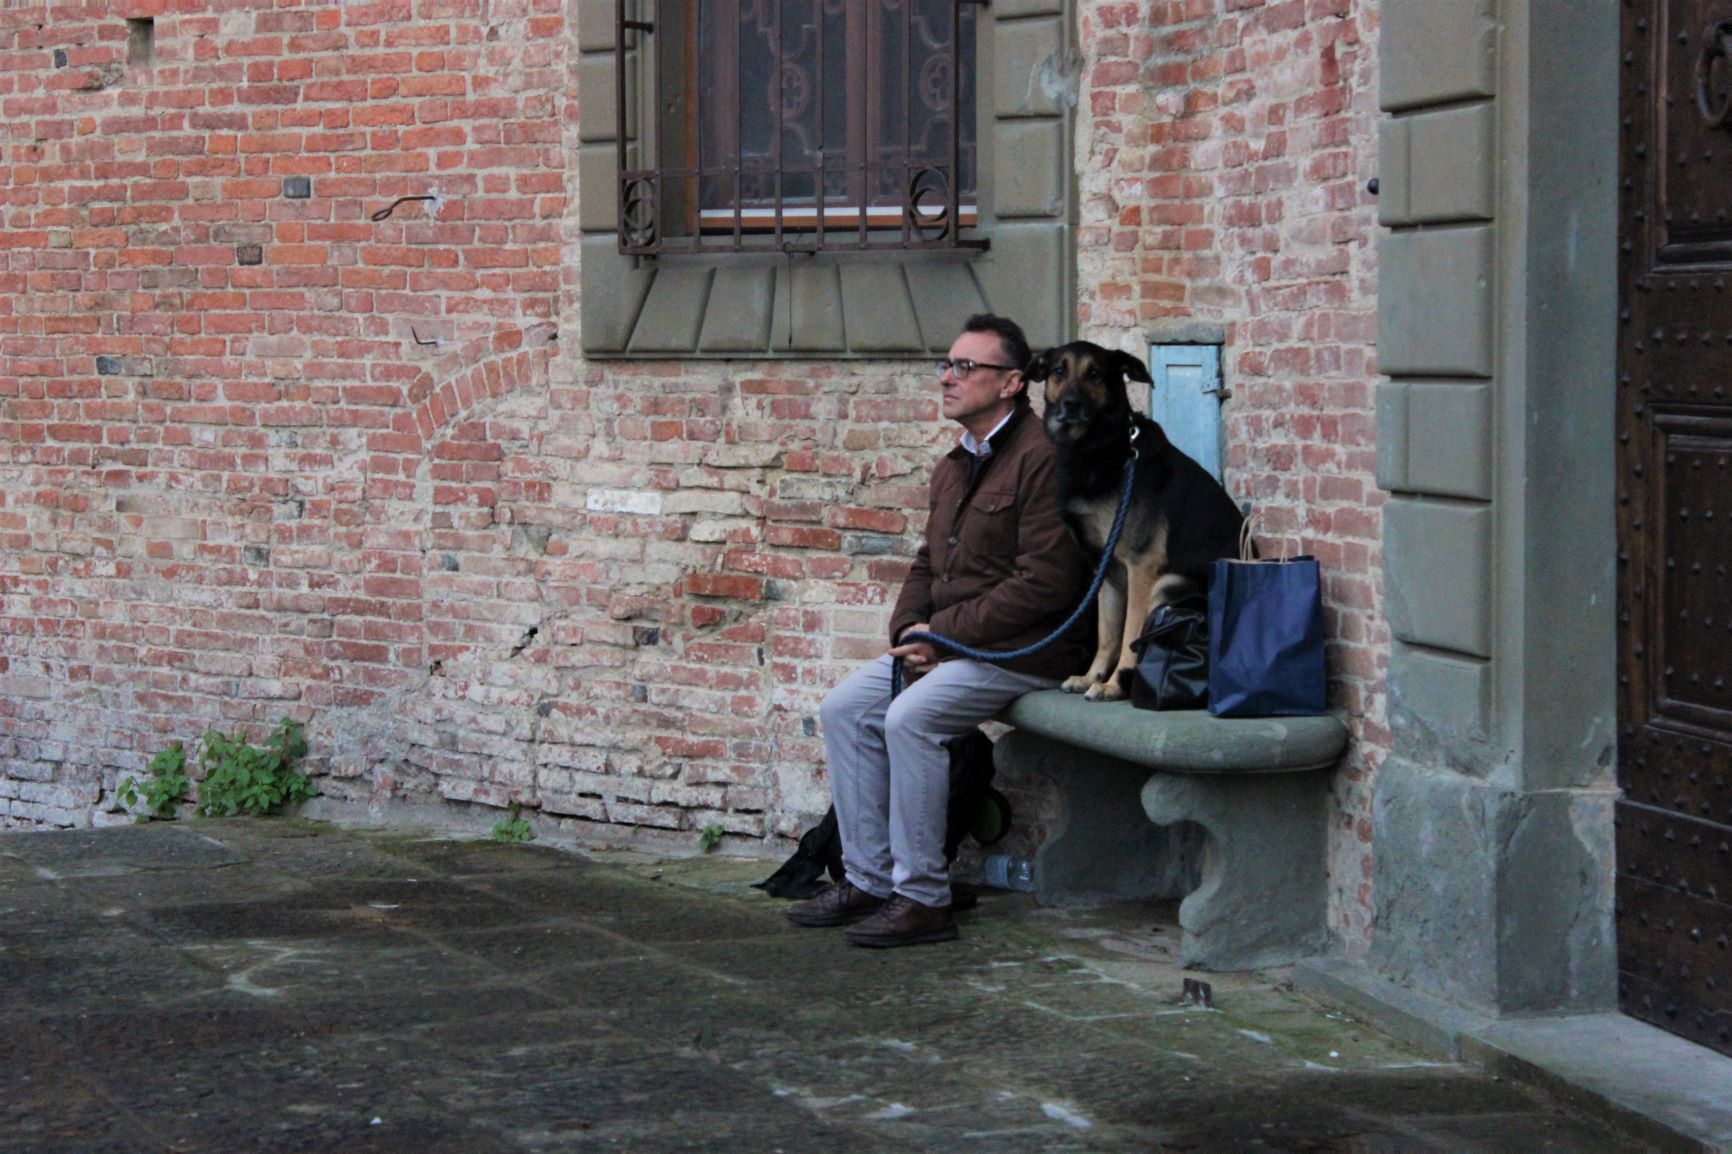 Two onlookers take a moment to quietly pause amidst the hubbub of the streets of San Miniato.